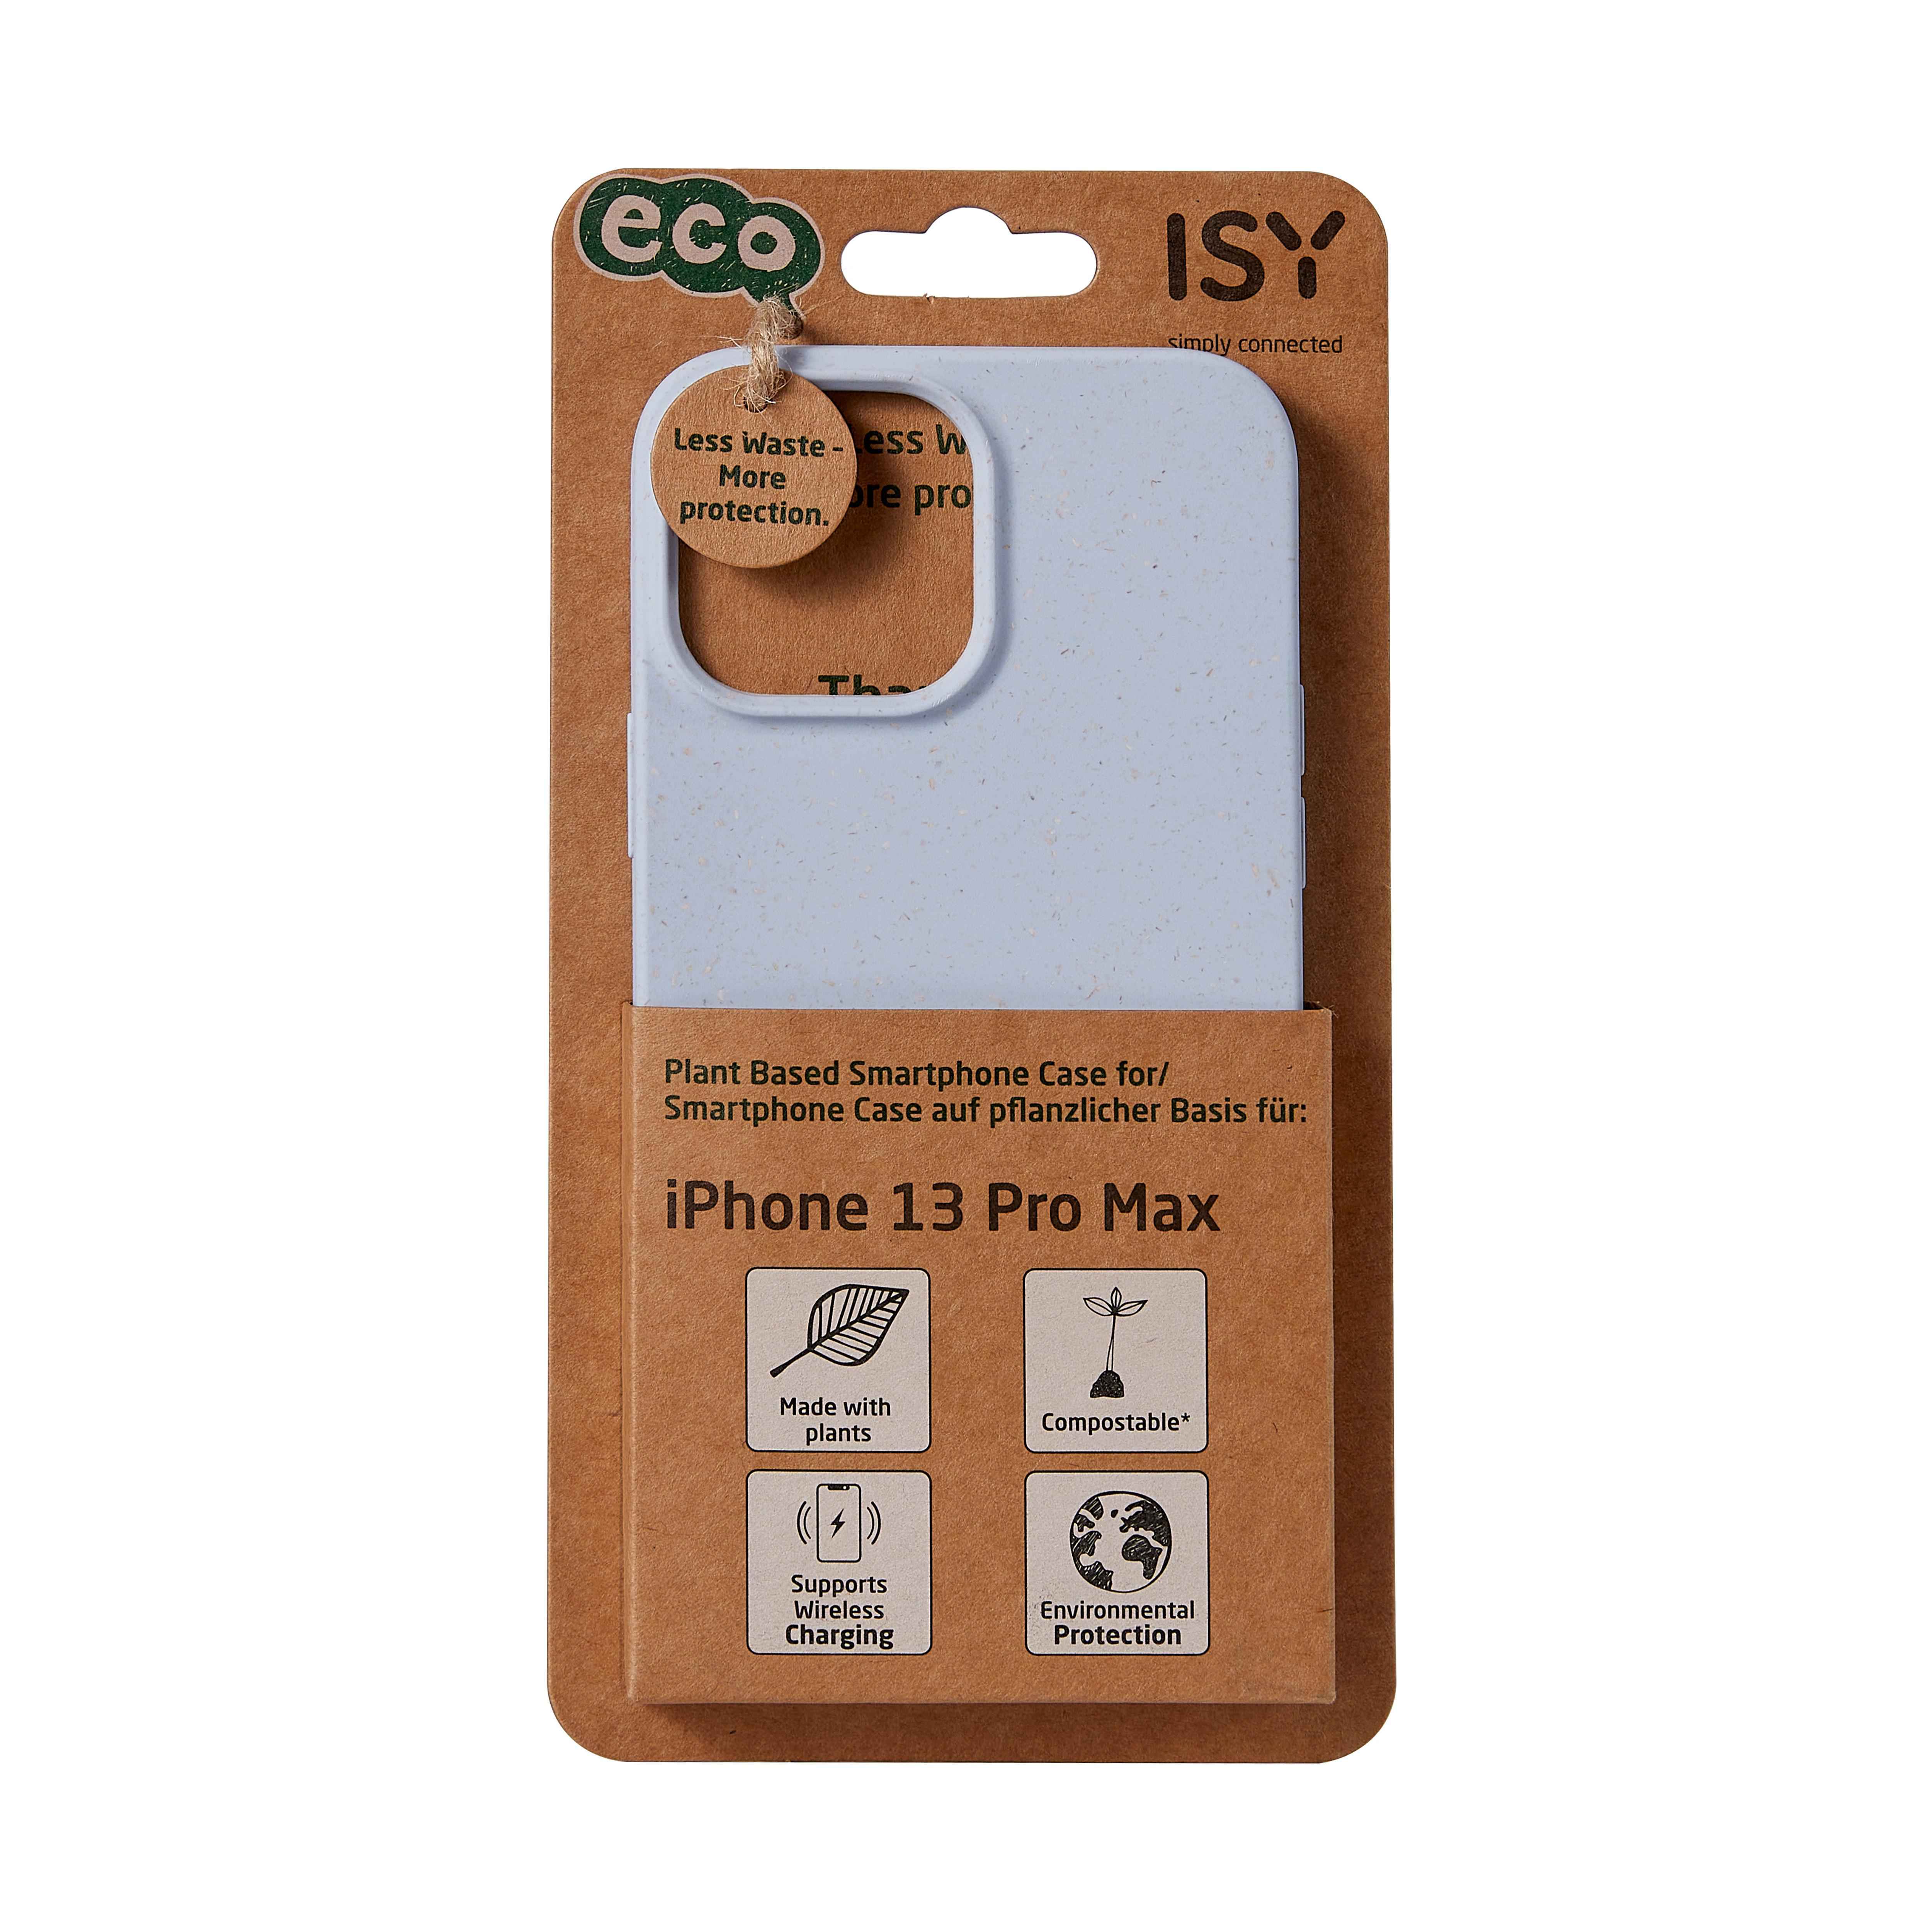 ISY ISC-6005, BioCase, Pro Apple, Max, Blau iPhone 13 Backcover